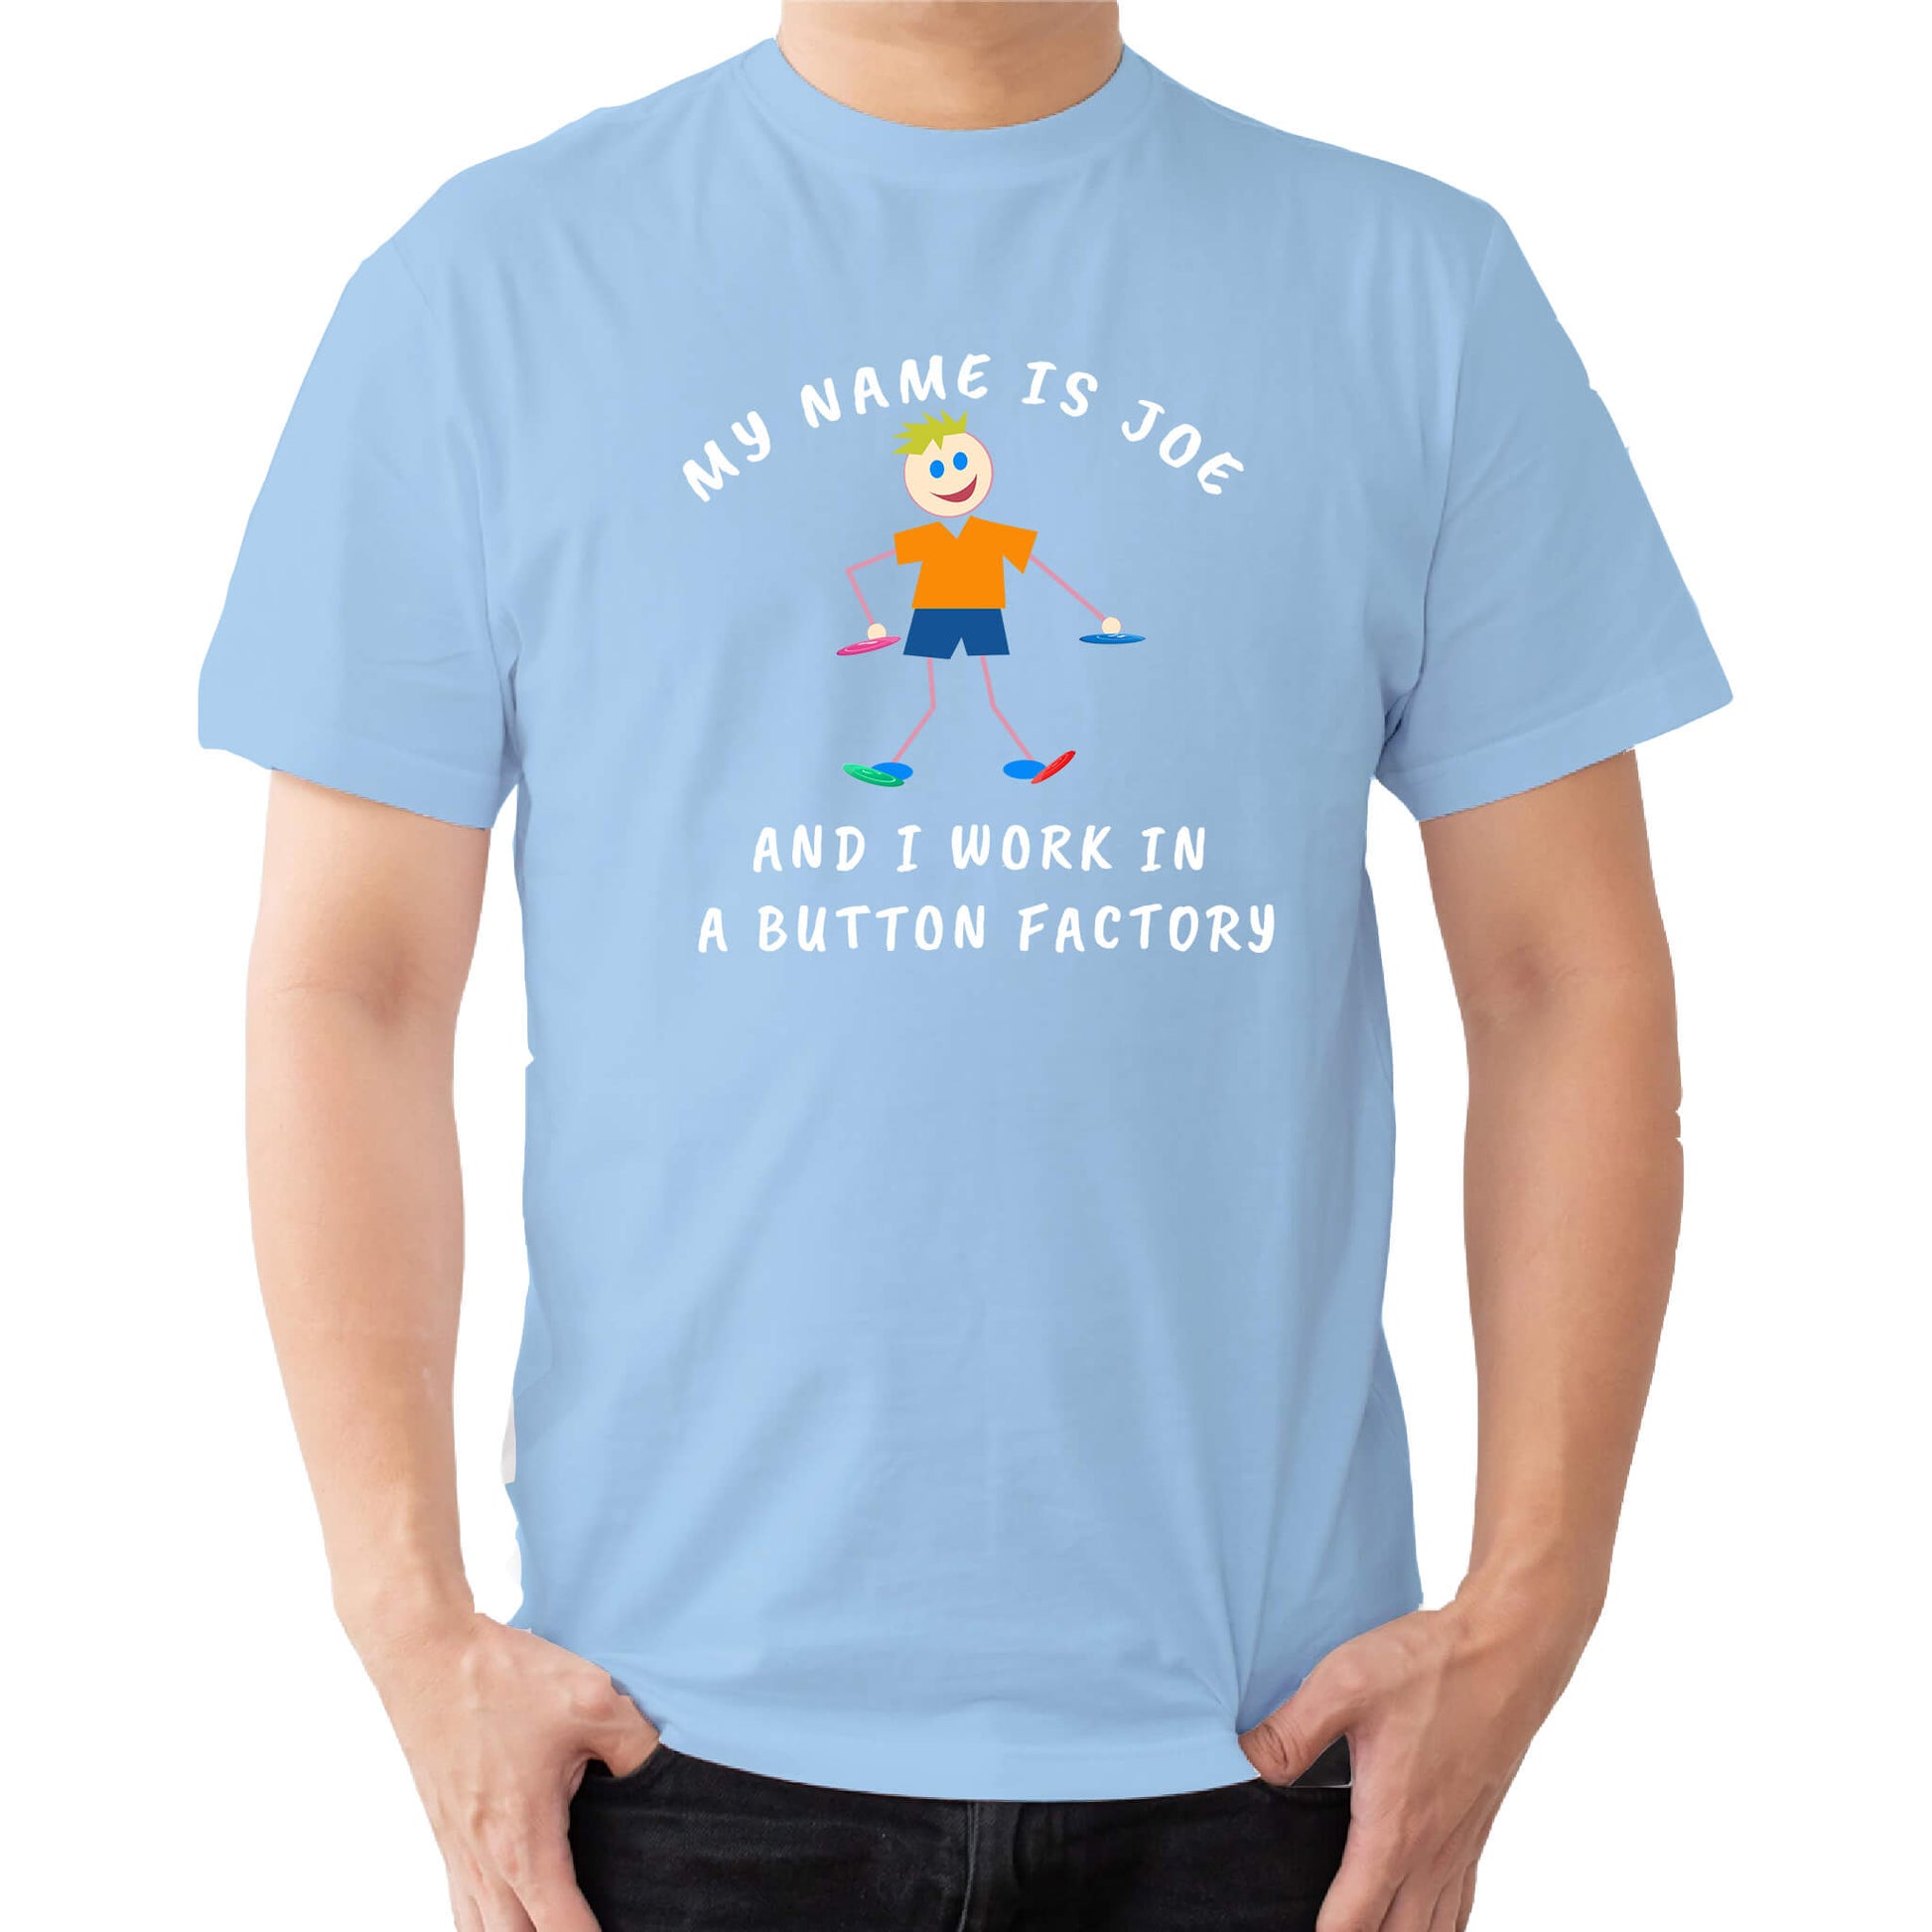 MY NAME IS JO AND I WORK IN A BUTTON FACTORY T-SHIRT